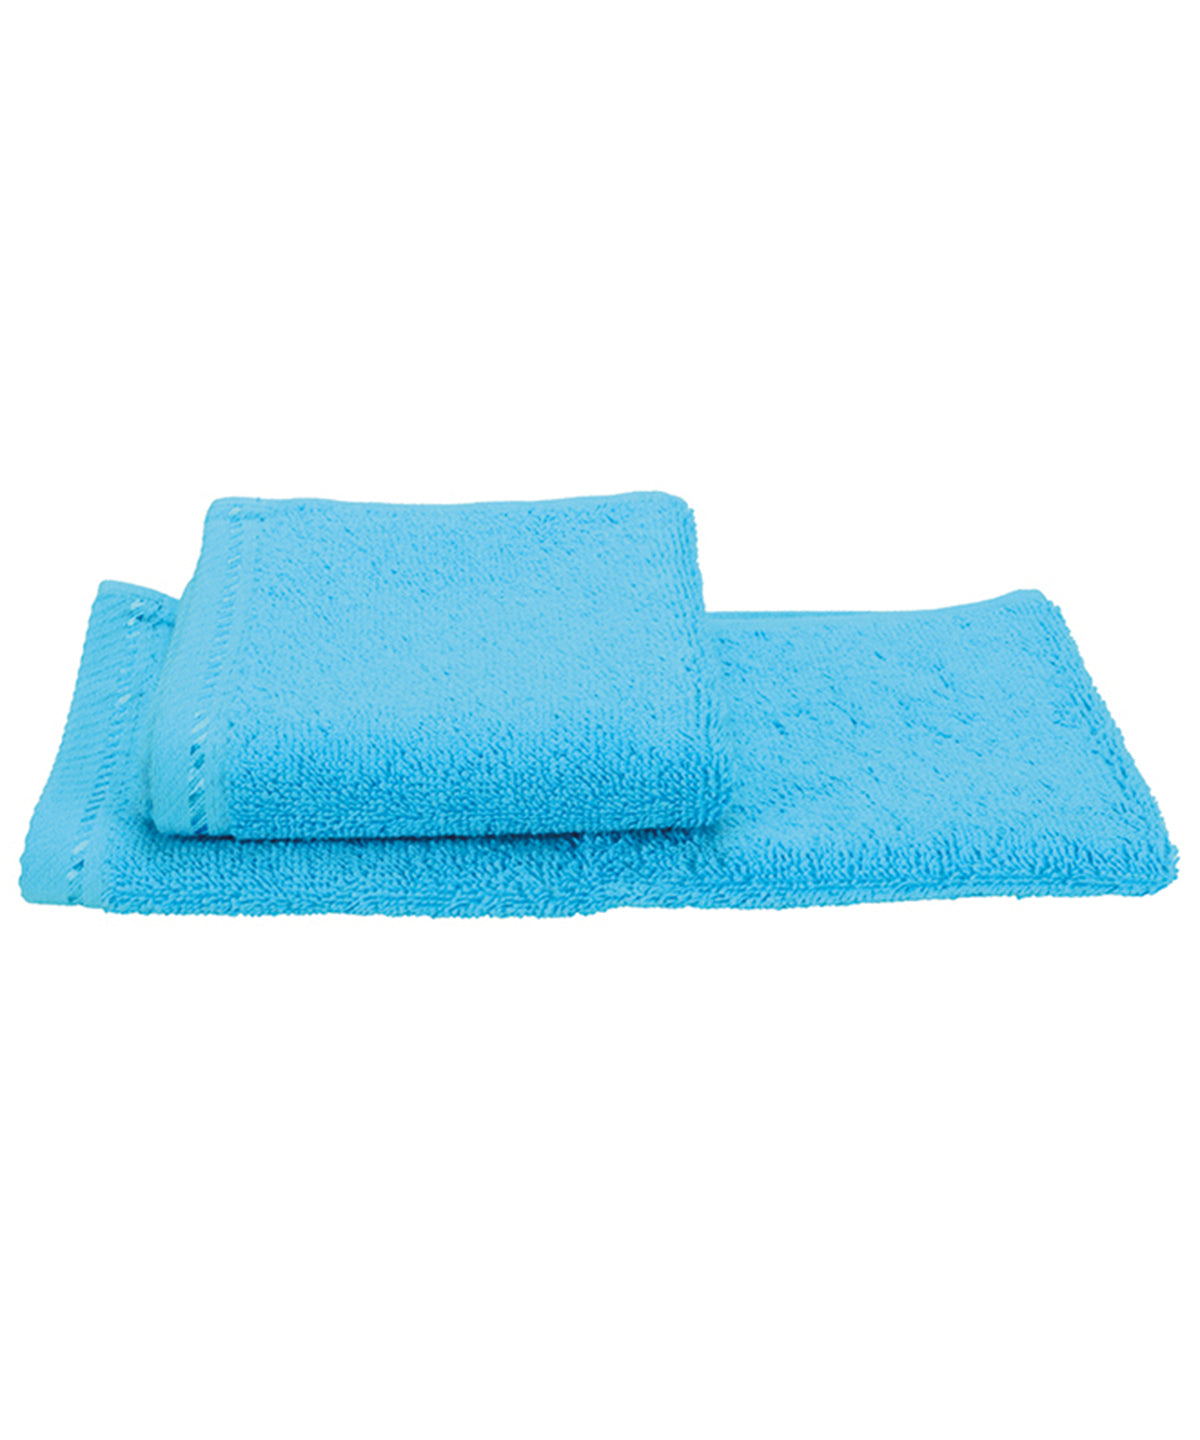 Personalised Towels - Turquoise A&R Towels ARTG® Guest towel